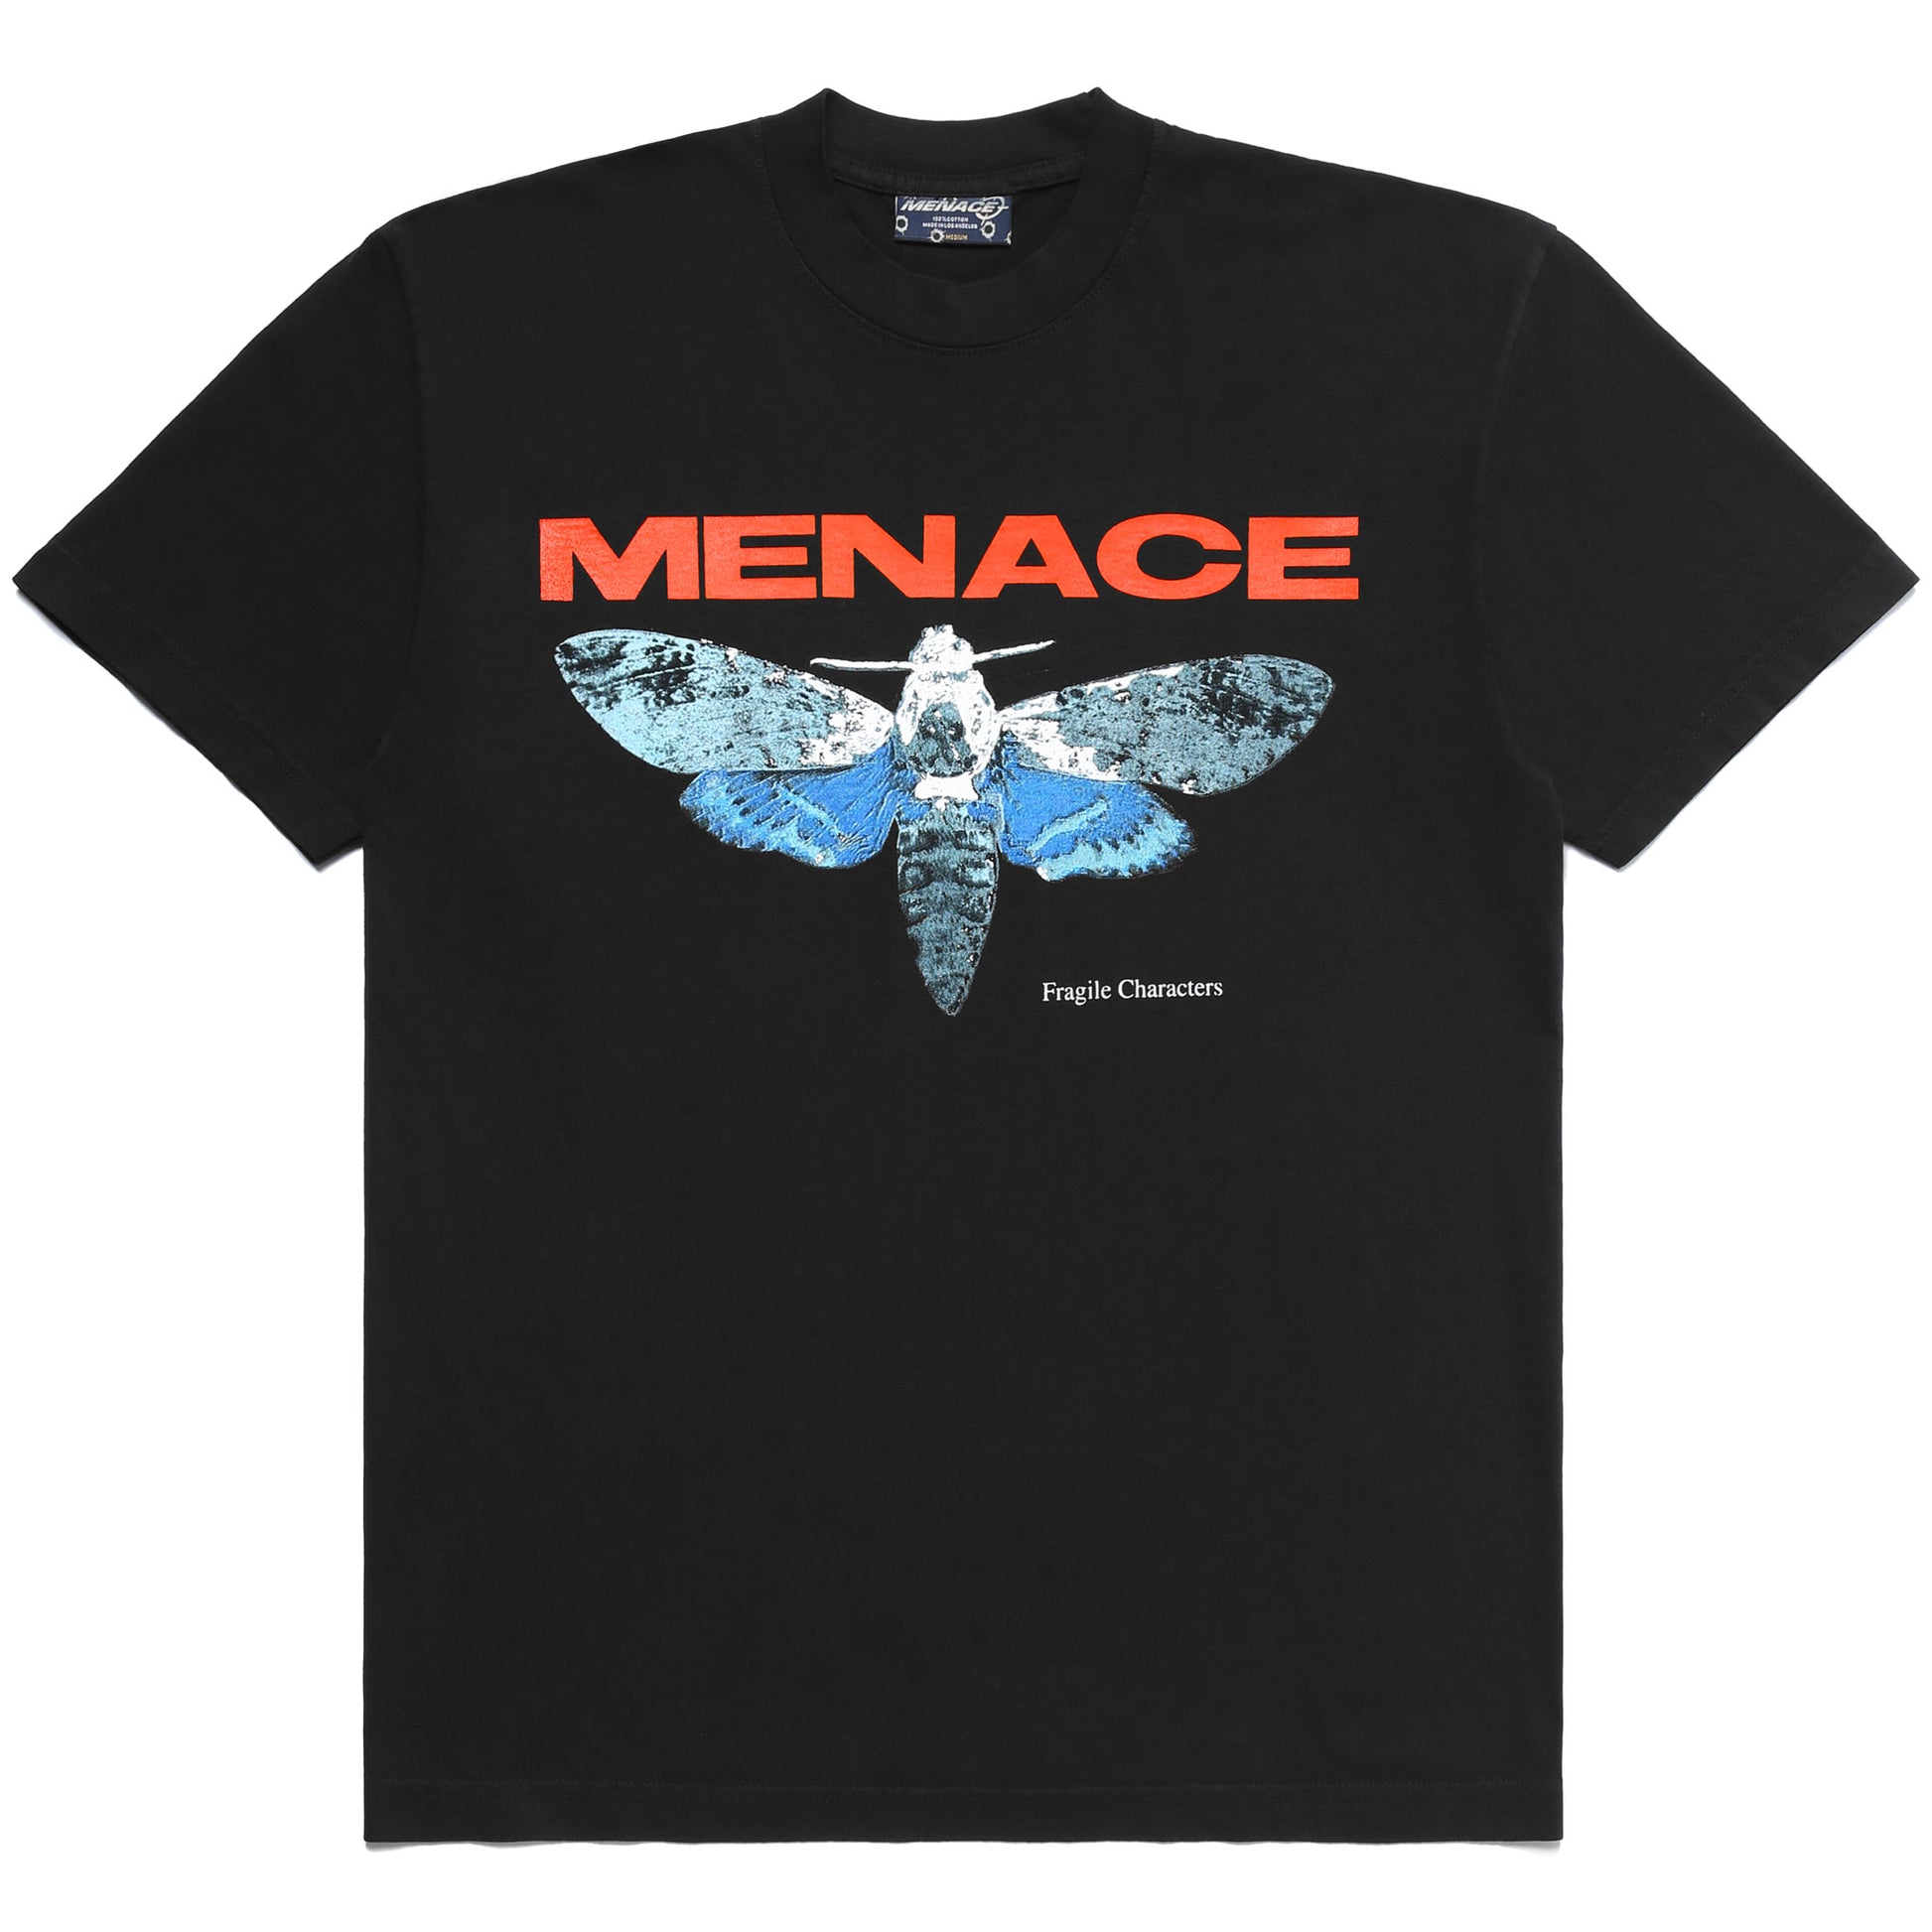 FRAGILE CHARACTERS T-SHIRT by MENACE